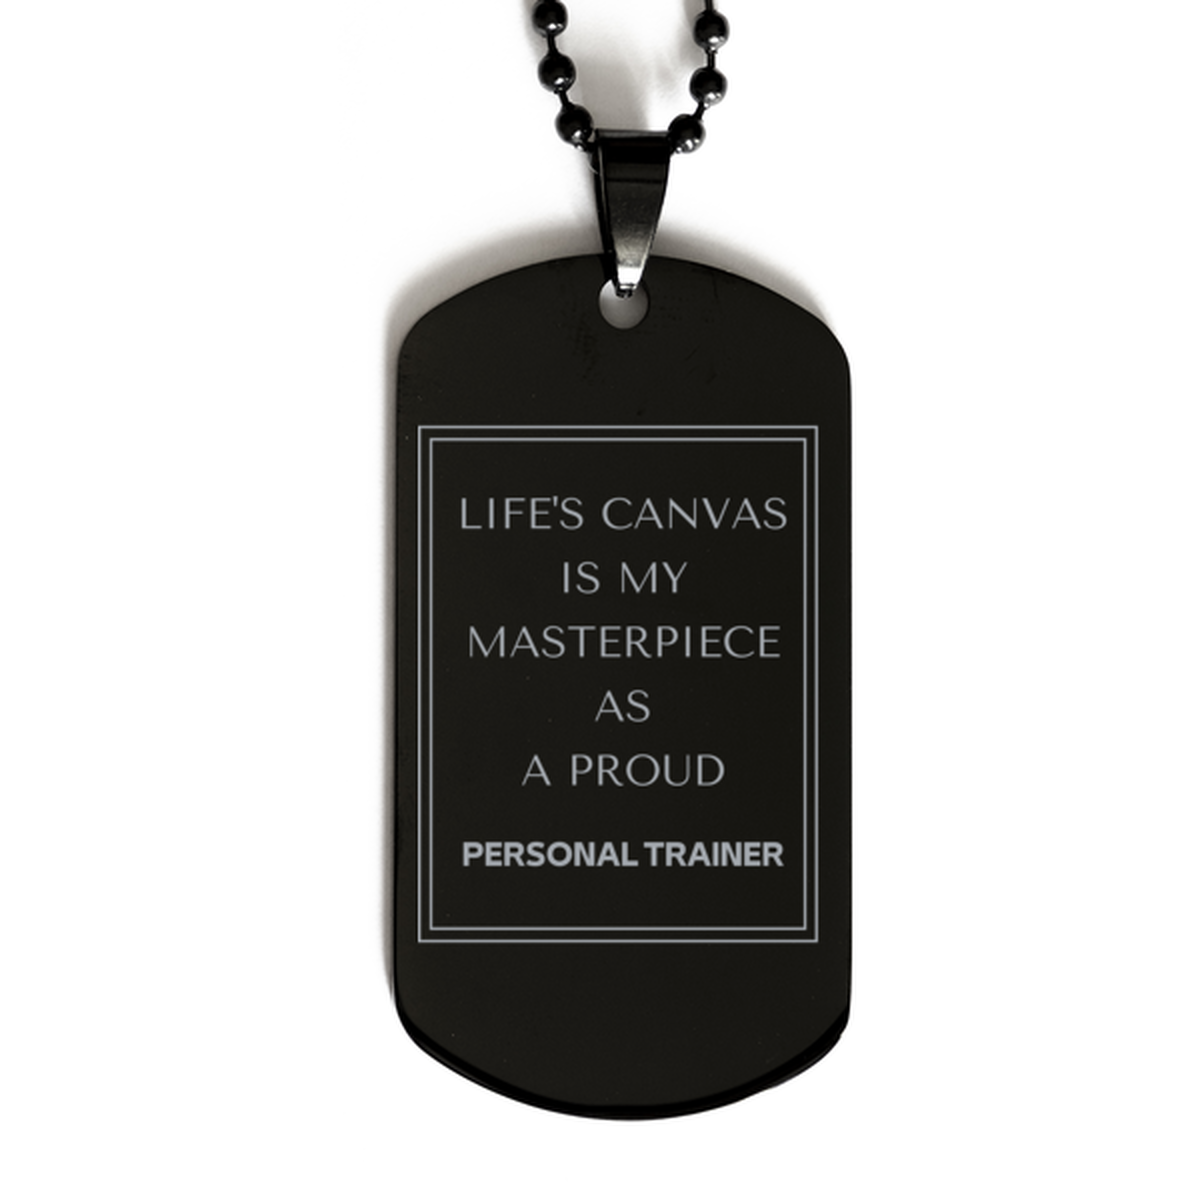 Proud Personal Trainer Gifts, Life's canvas is my masterpiece, Epic Birthday Christmas Unique Black Dog Tag For Personal Trainer, Coworkers, Men, Women, Friends